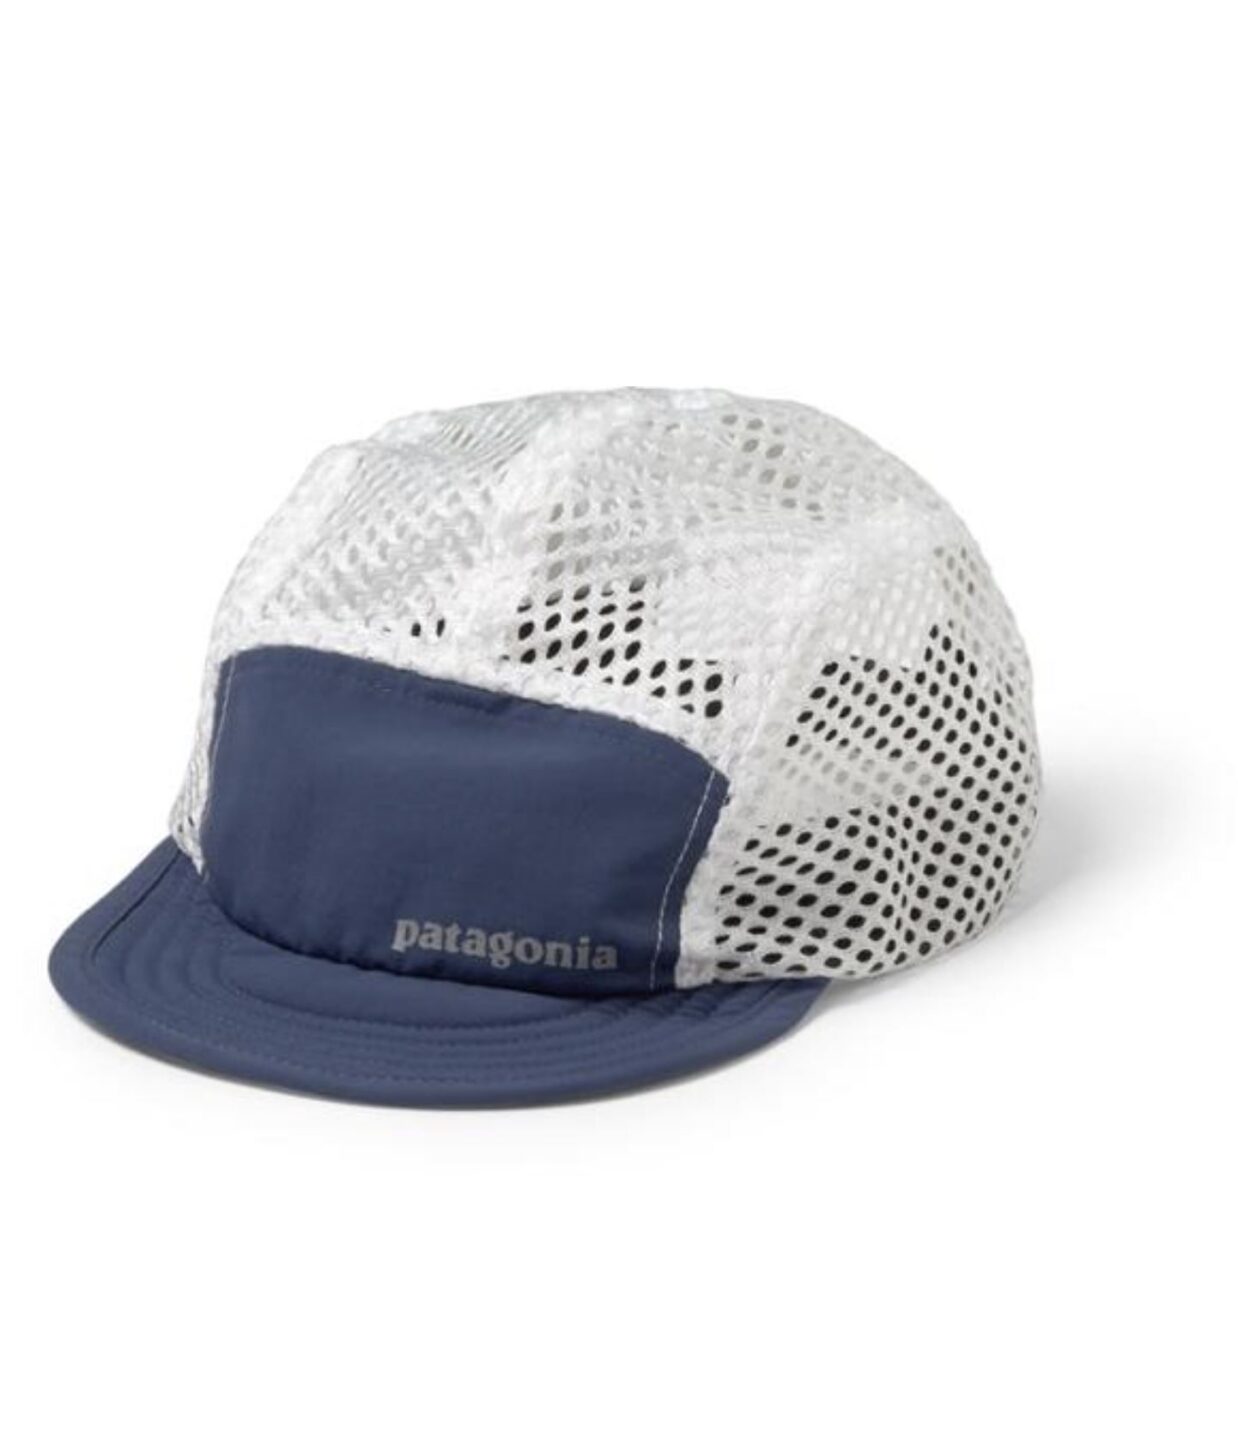 a patagonia duckbill cap against a white background